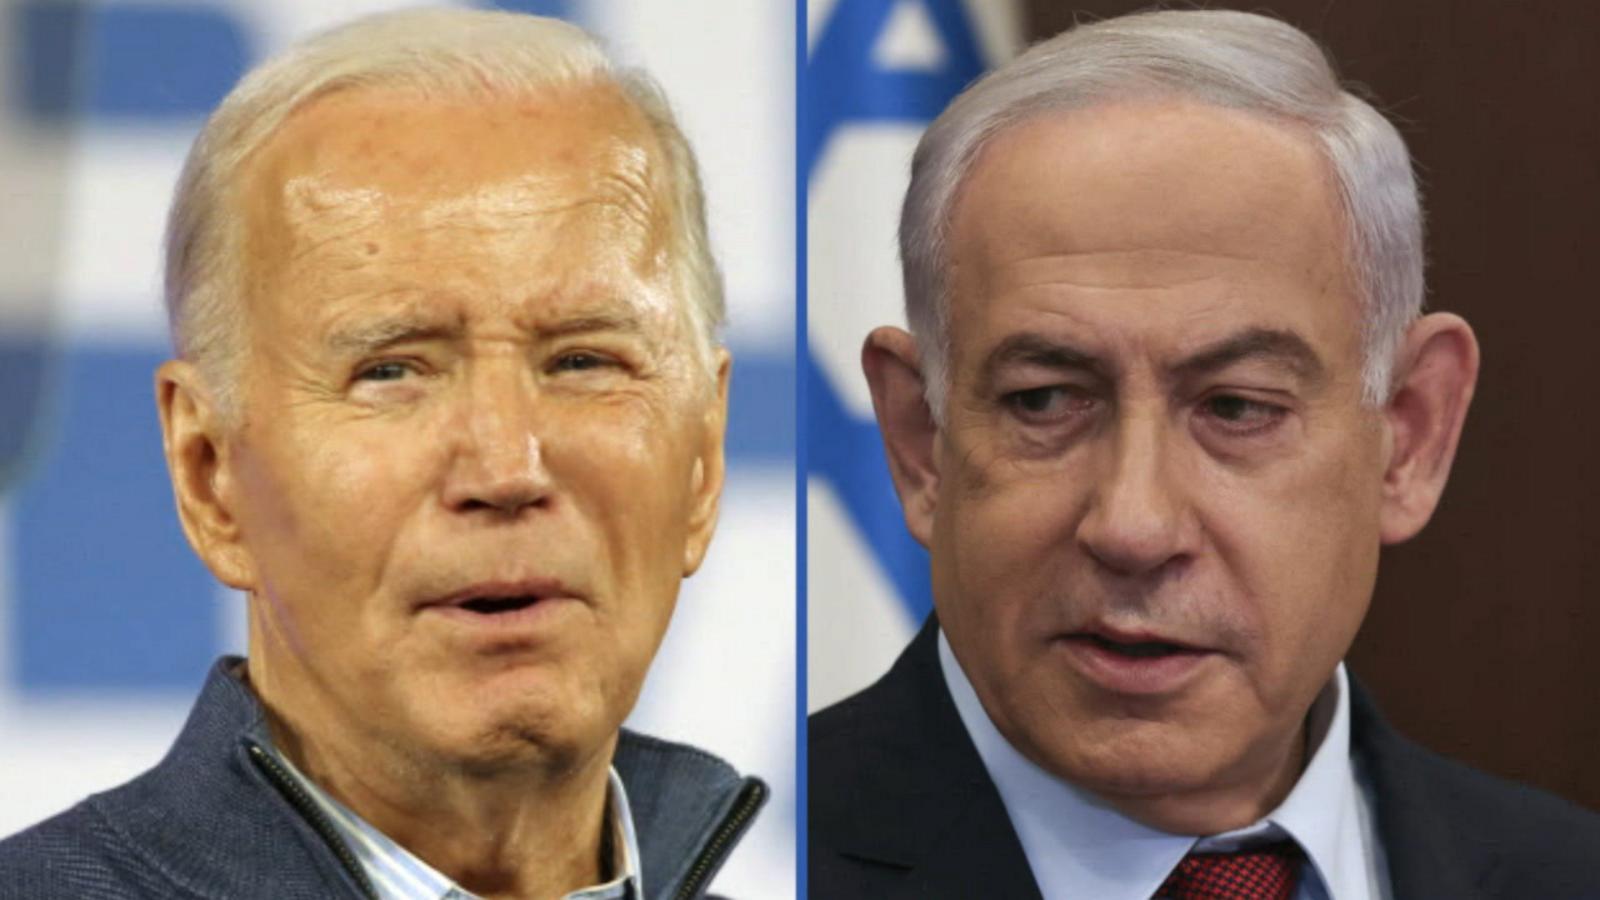 VIDEO: Biden to speak with Netanyahu for 1st time since aid workers killed by air strike